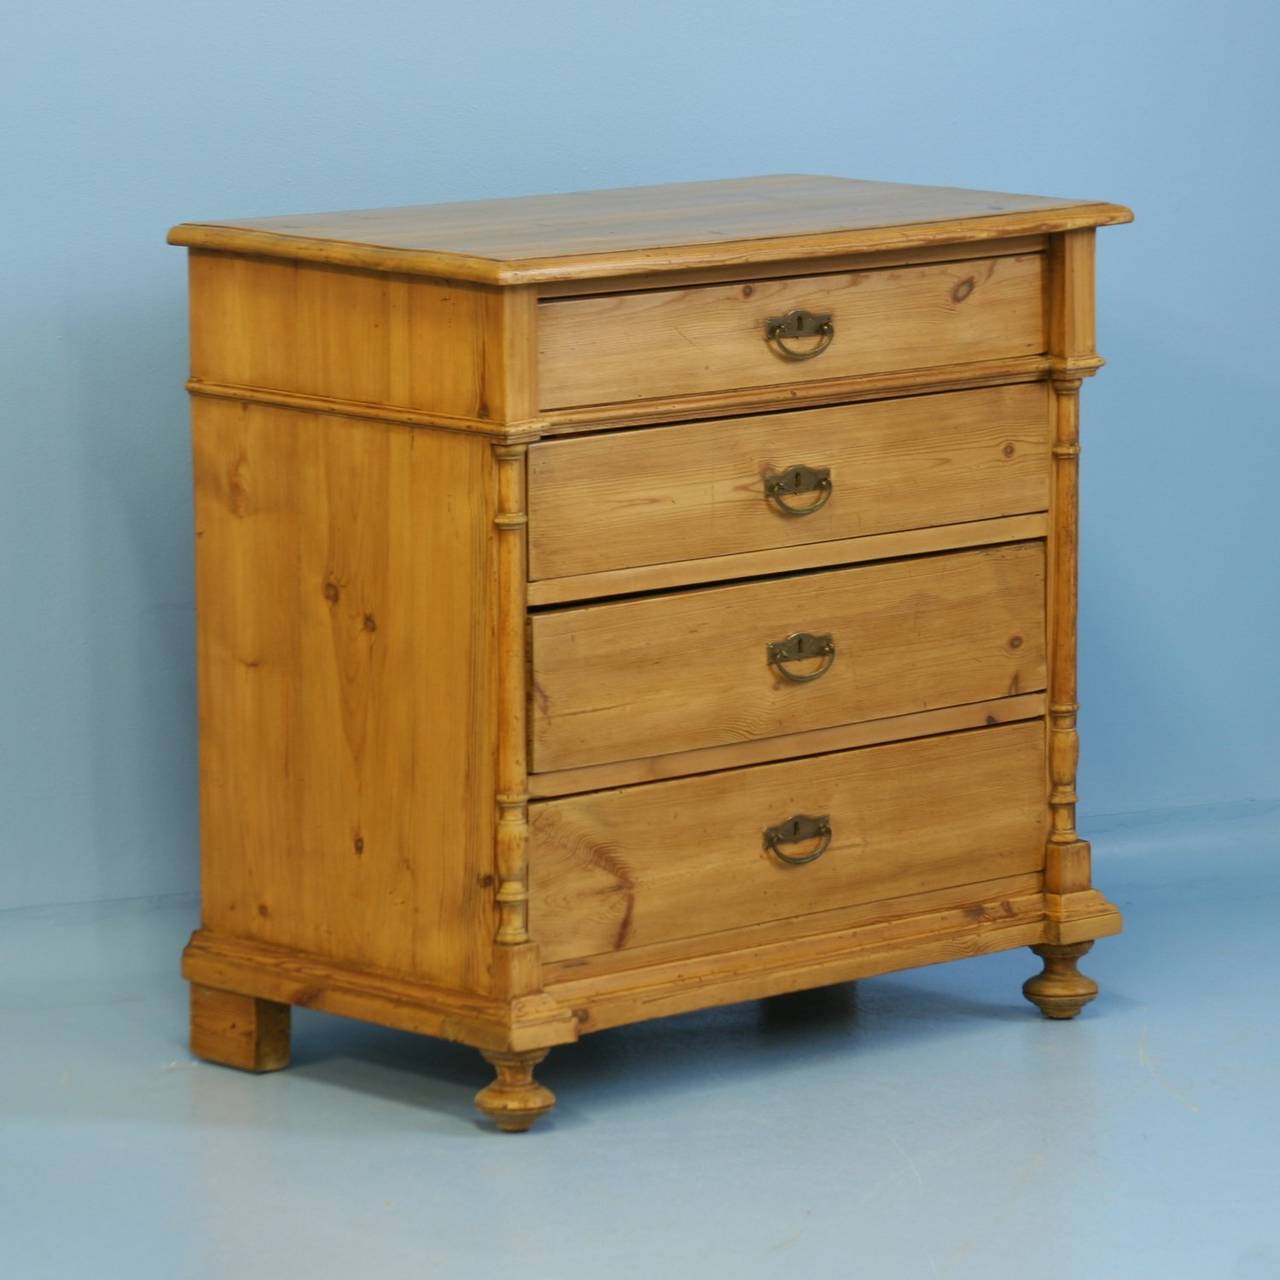 This lovely chest of 4 drawers is from Denmark, circa 1880. The turned column details add a refined touch to its 